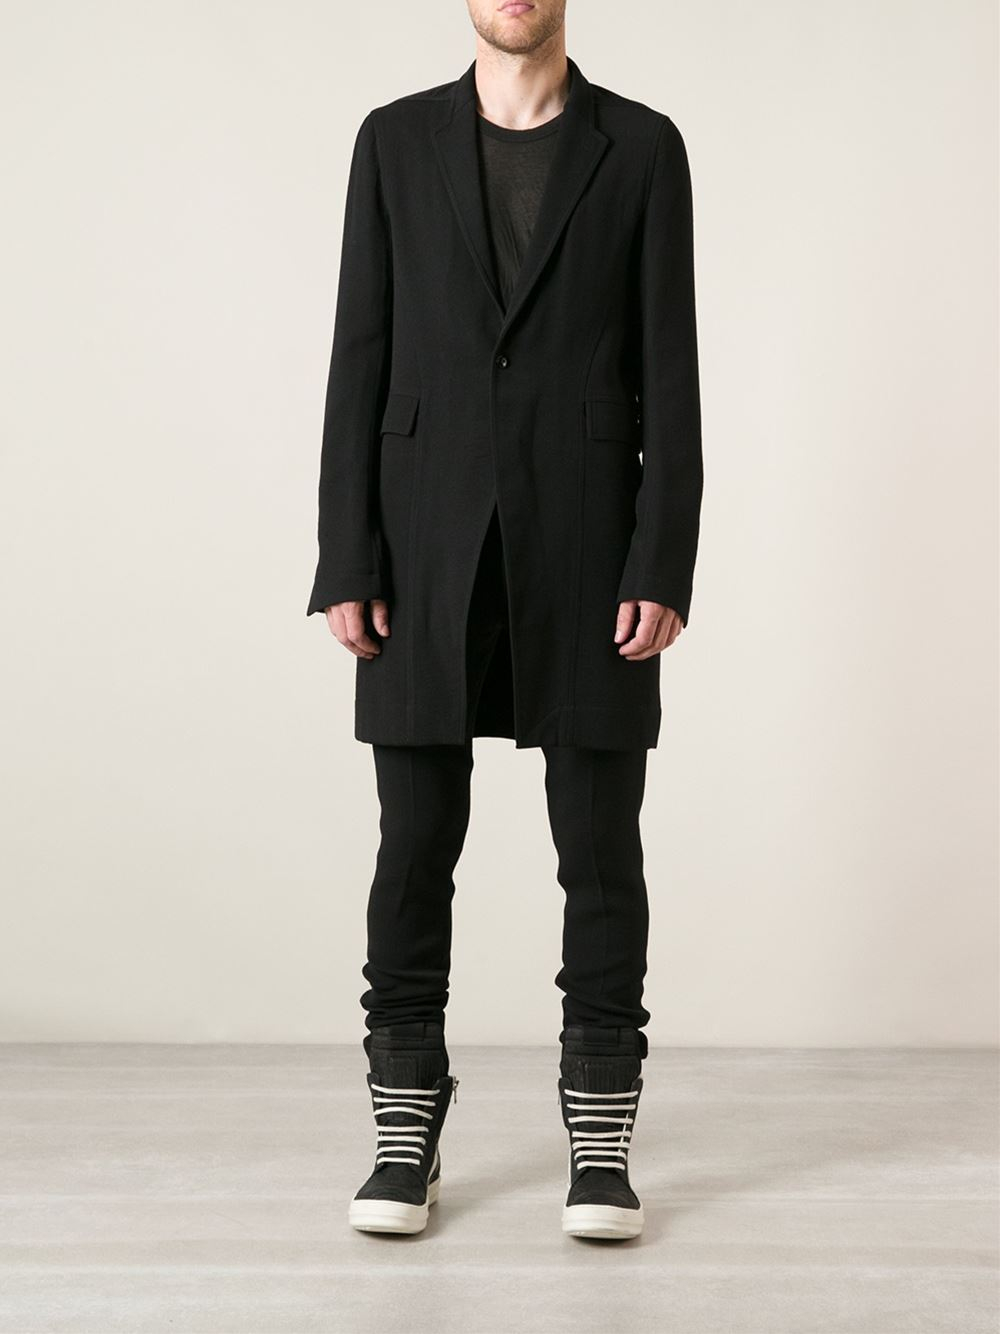 Rick Owens Vicious Long Jacket in Black for Men | Lyst